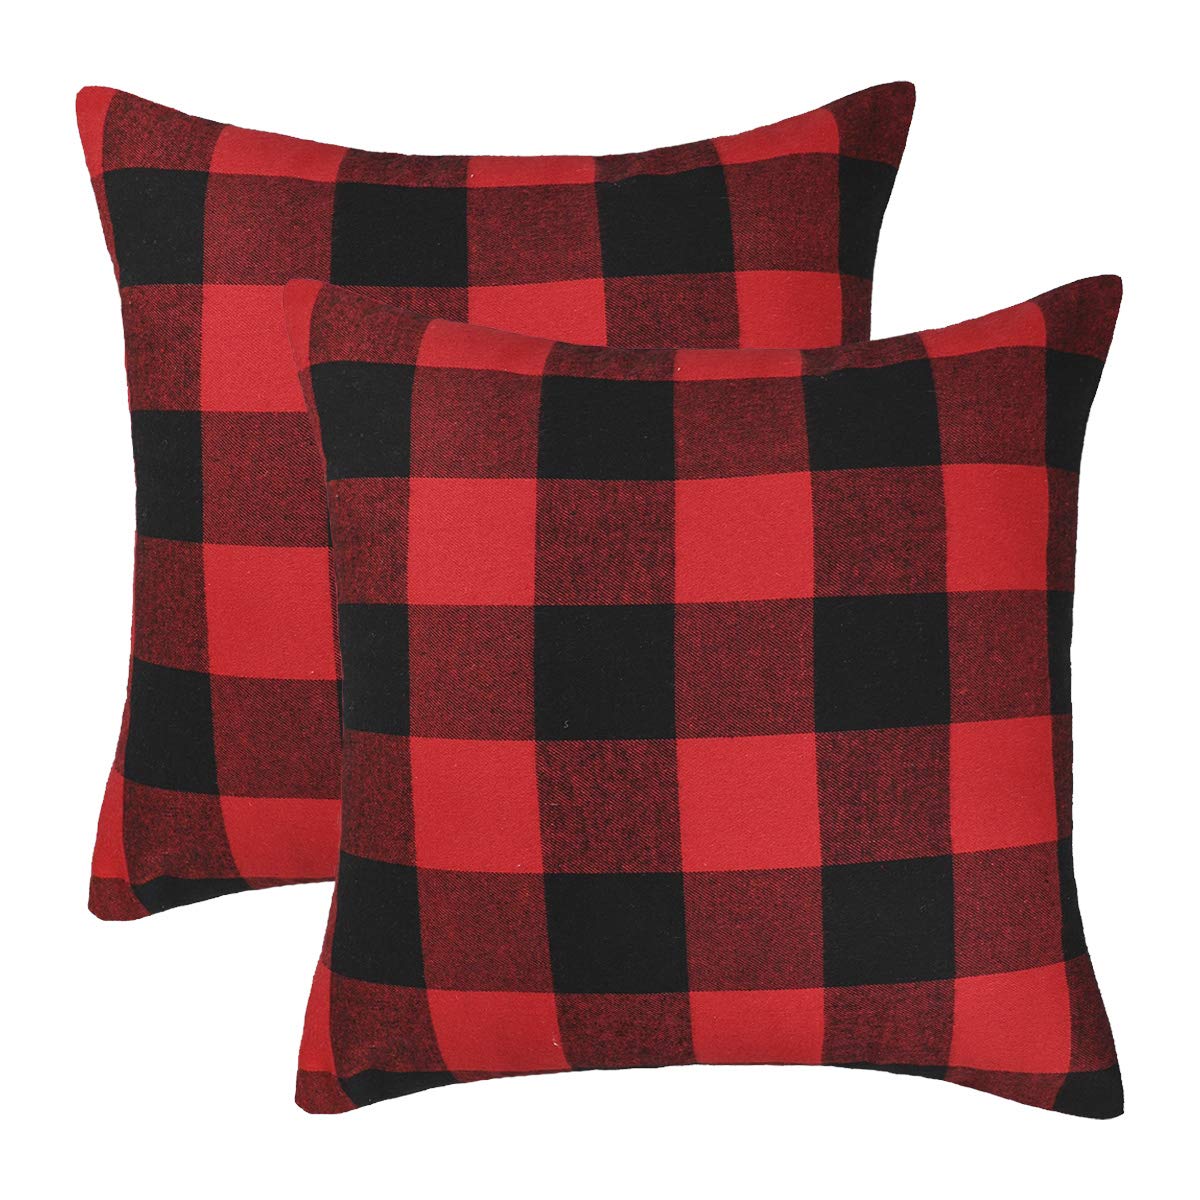 Set of 2 Christmas Plaid Throw Pillow Covers Cushion Case Home Decor Red and Black